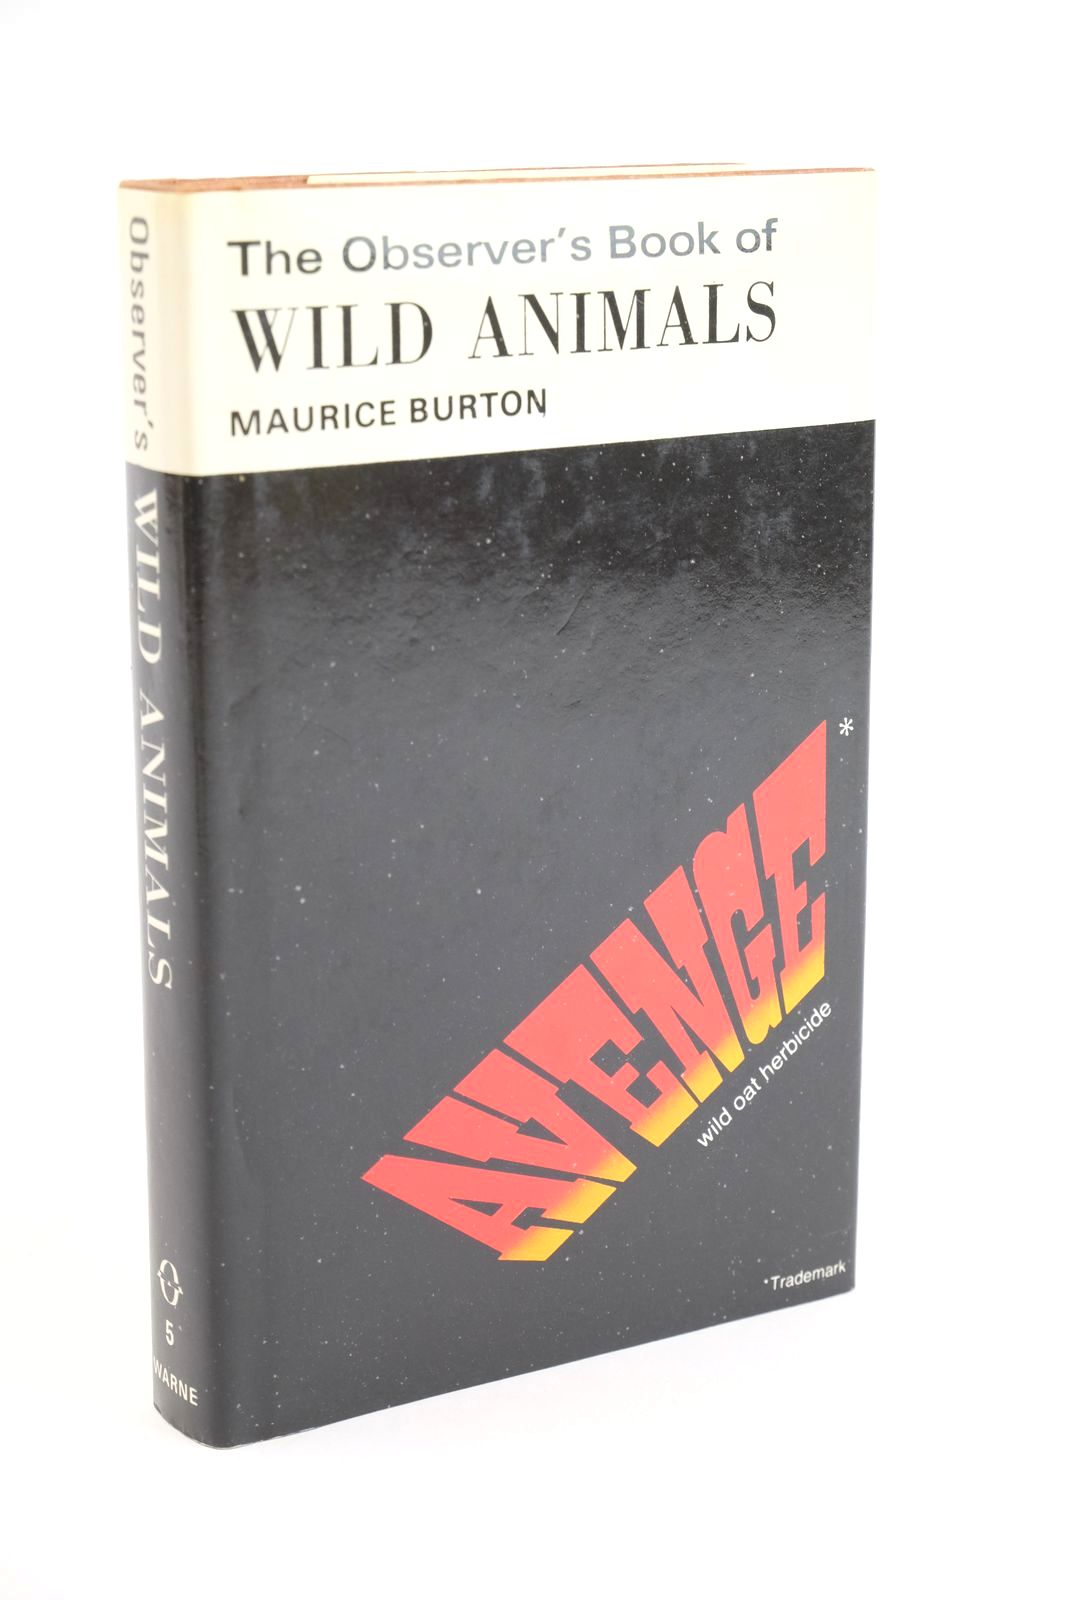 Photo of THE OBSERVER'S BOOK OF WILD ANIMALS (CYANAMID WRAPPER)- Stock Number: 1323652